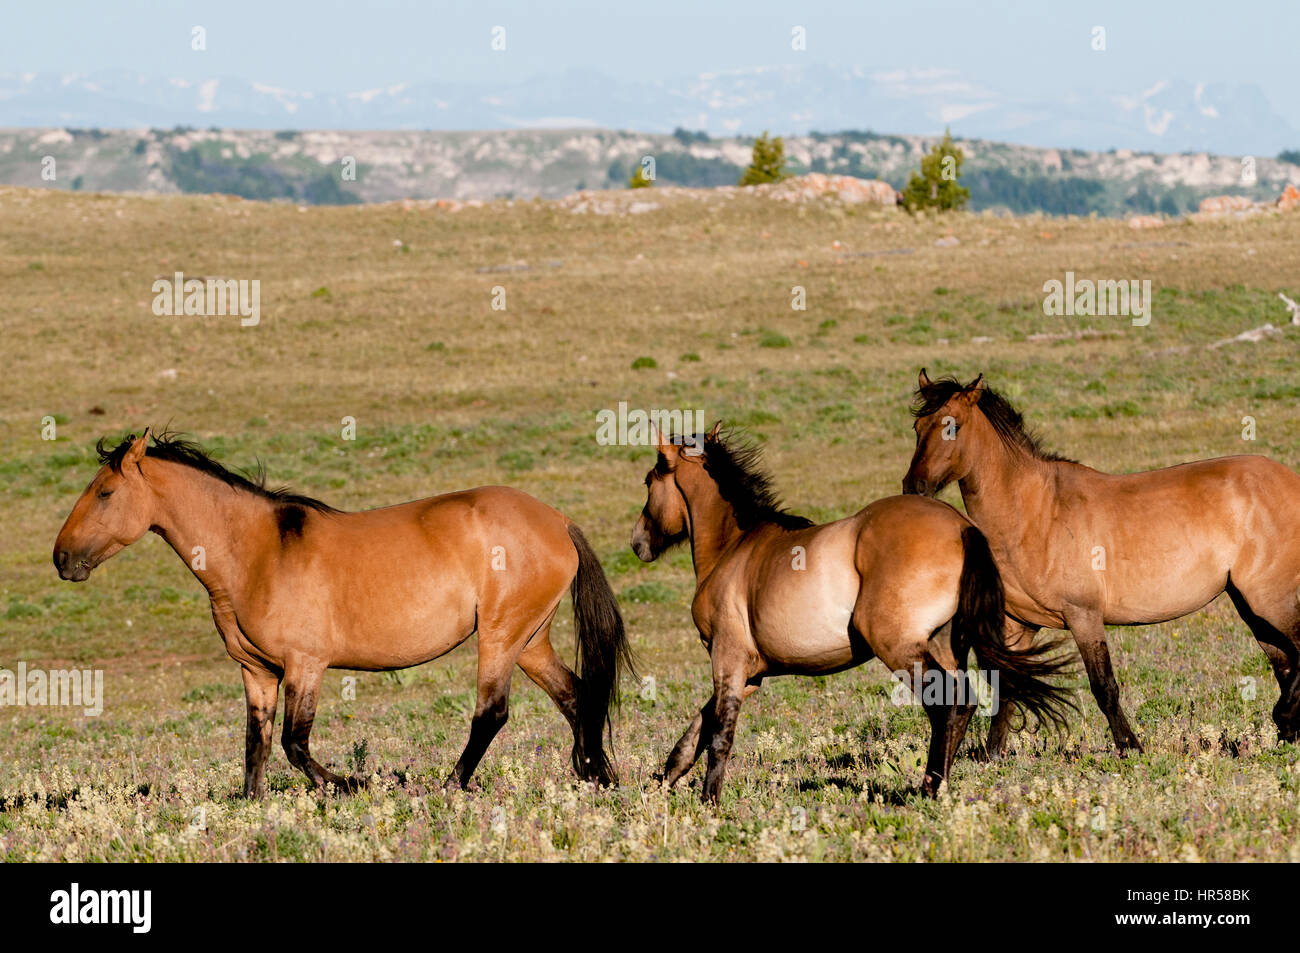 Pryor montagne mustangs in esecuzione Foto Stock